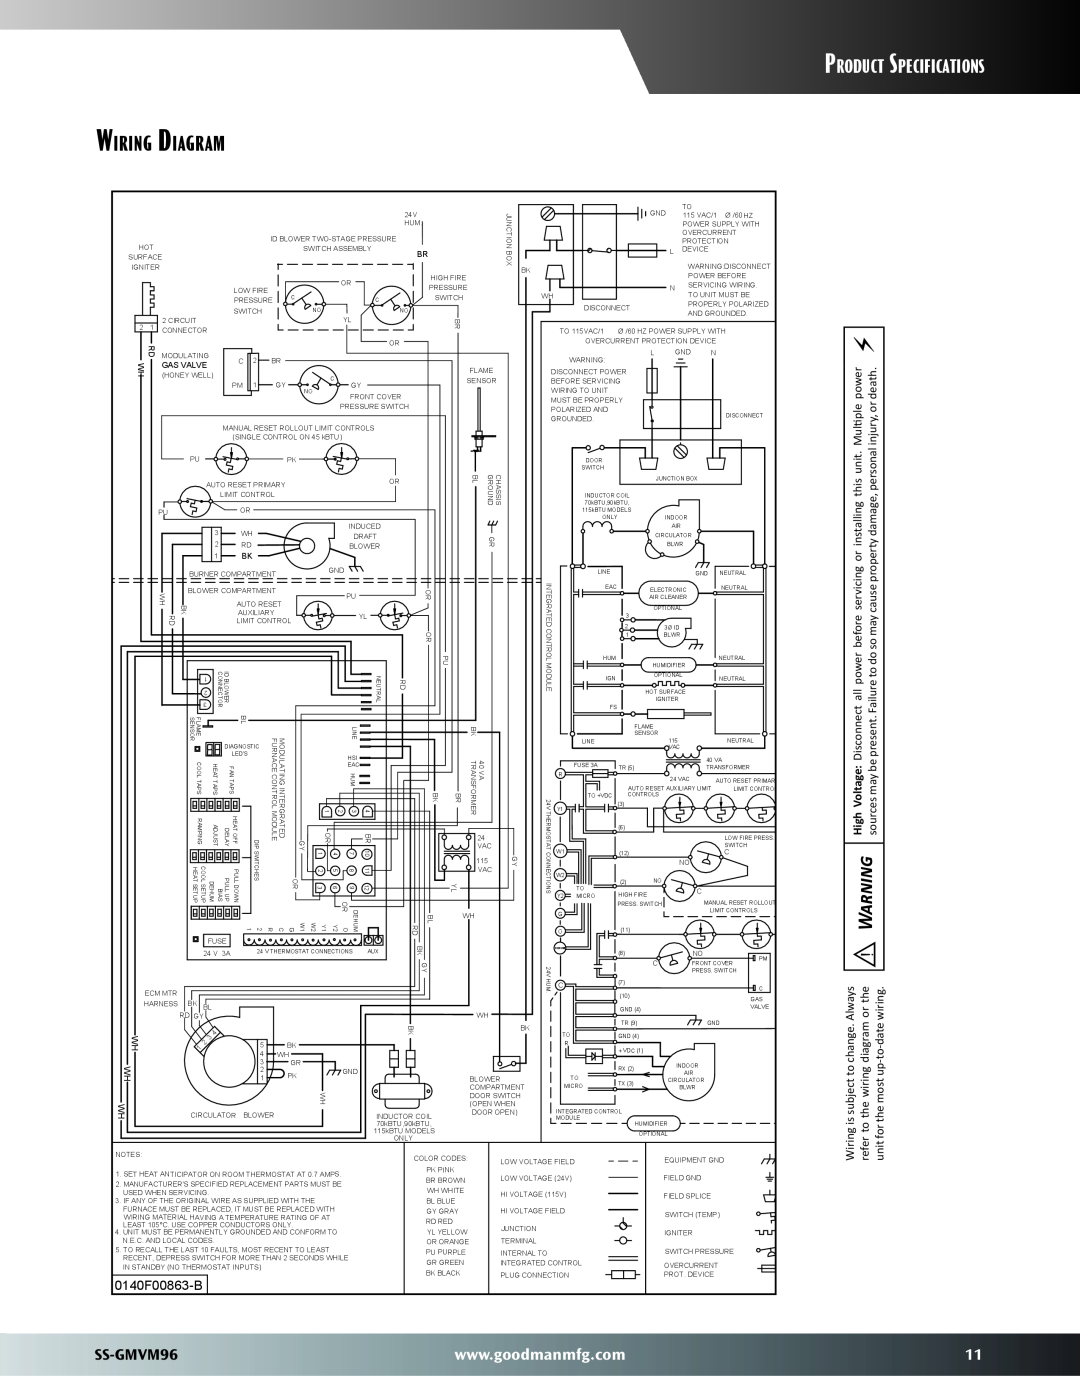 Goodman Mfg dimensions Wiring Diagram, Product Specifications, SS-GMVM96, 0140F00863-B, High Voltage sources may be 